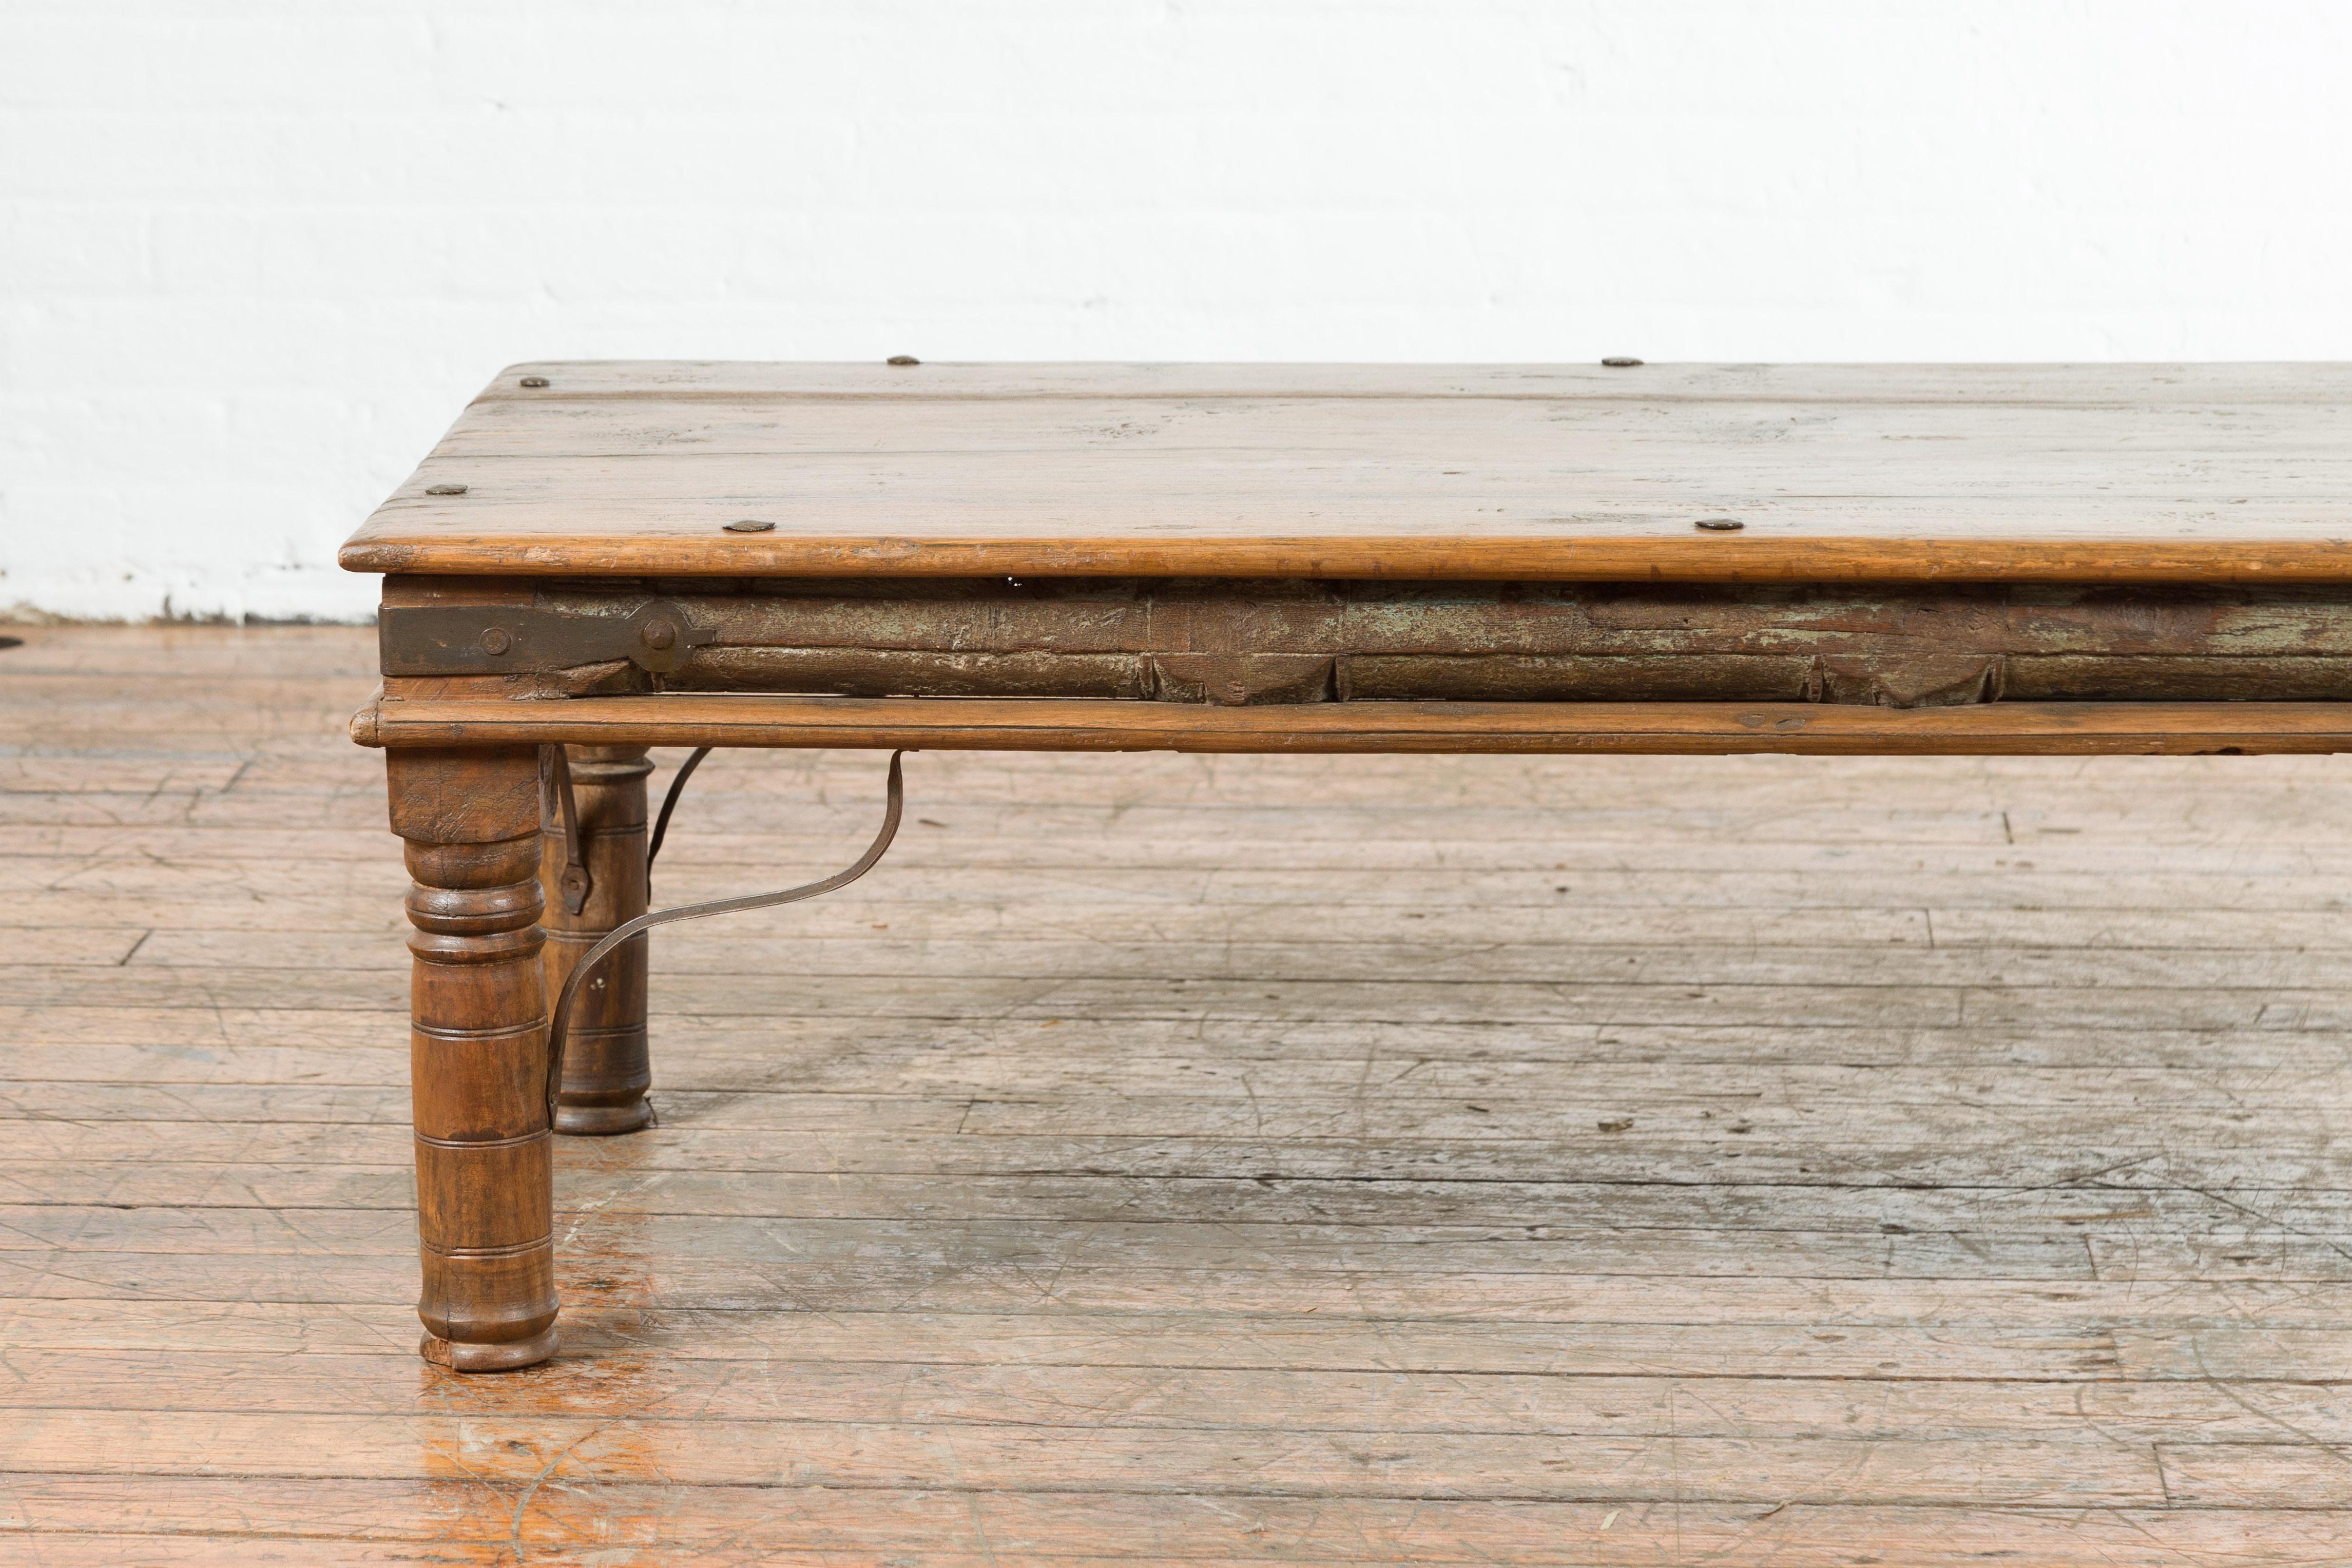 19th Century Rustic Indian Coffee Table with Painted Apron and Iron Accents 1